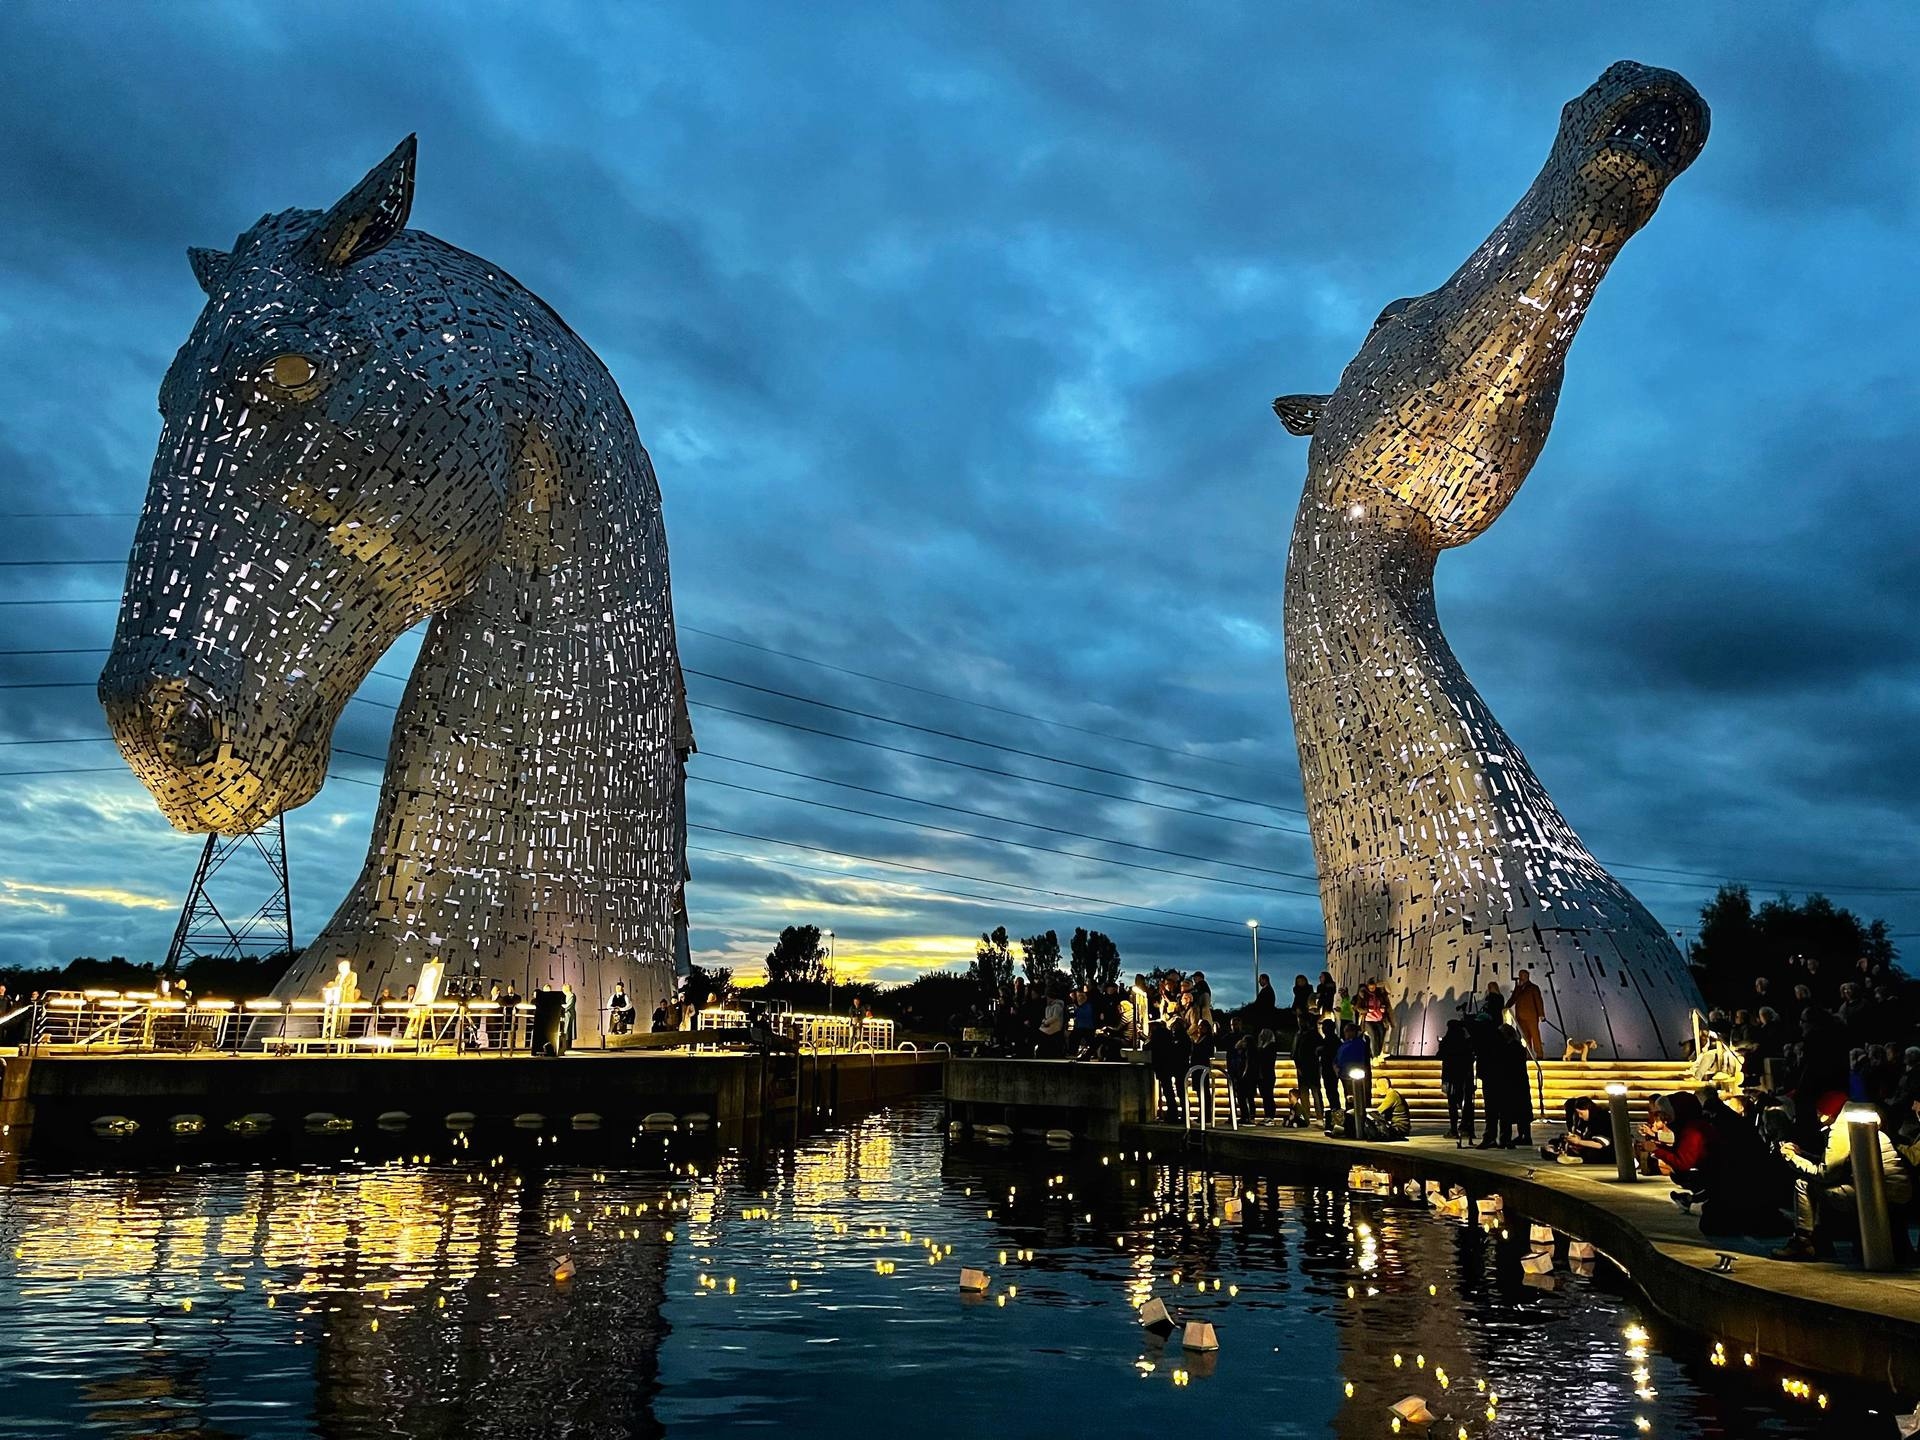 Tributes were paid at the Kelpies in Falkirk.